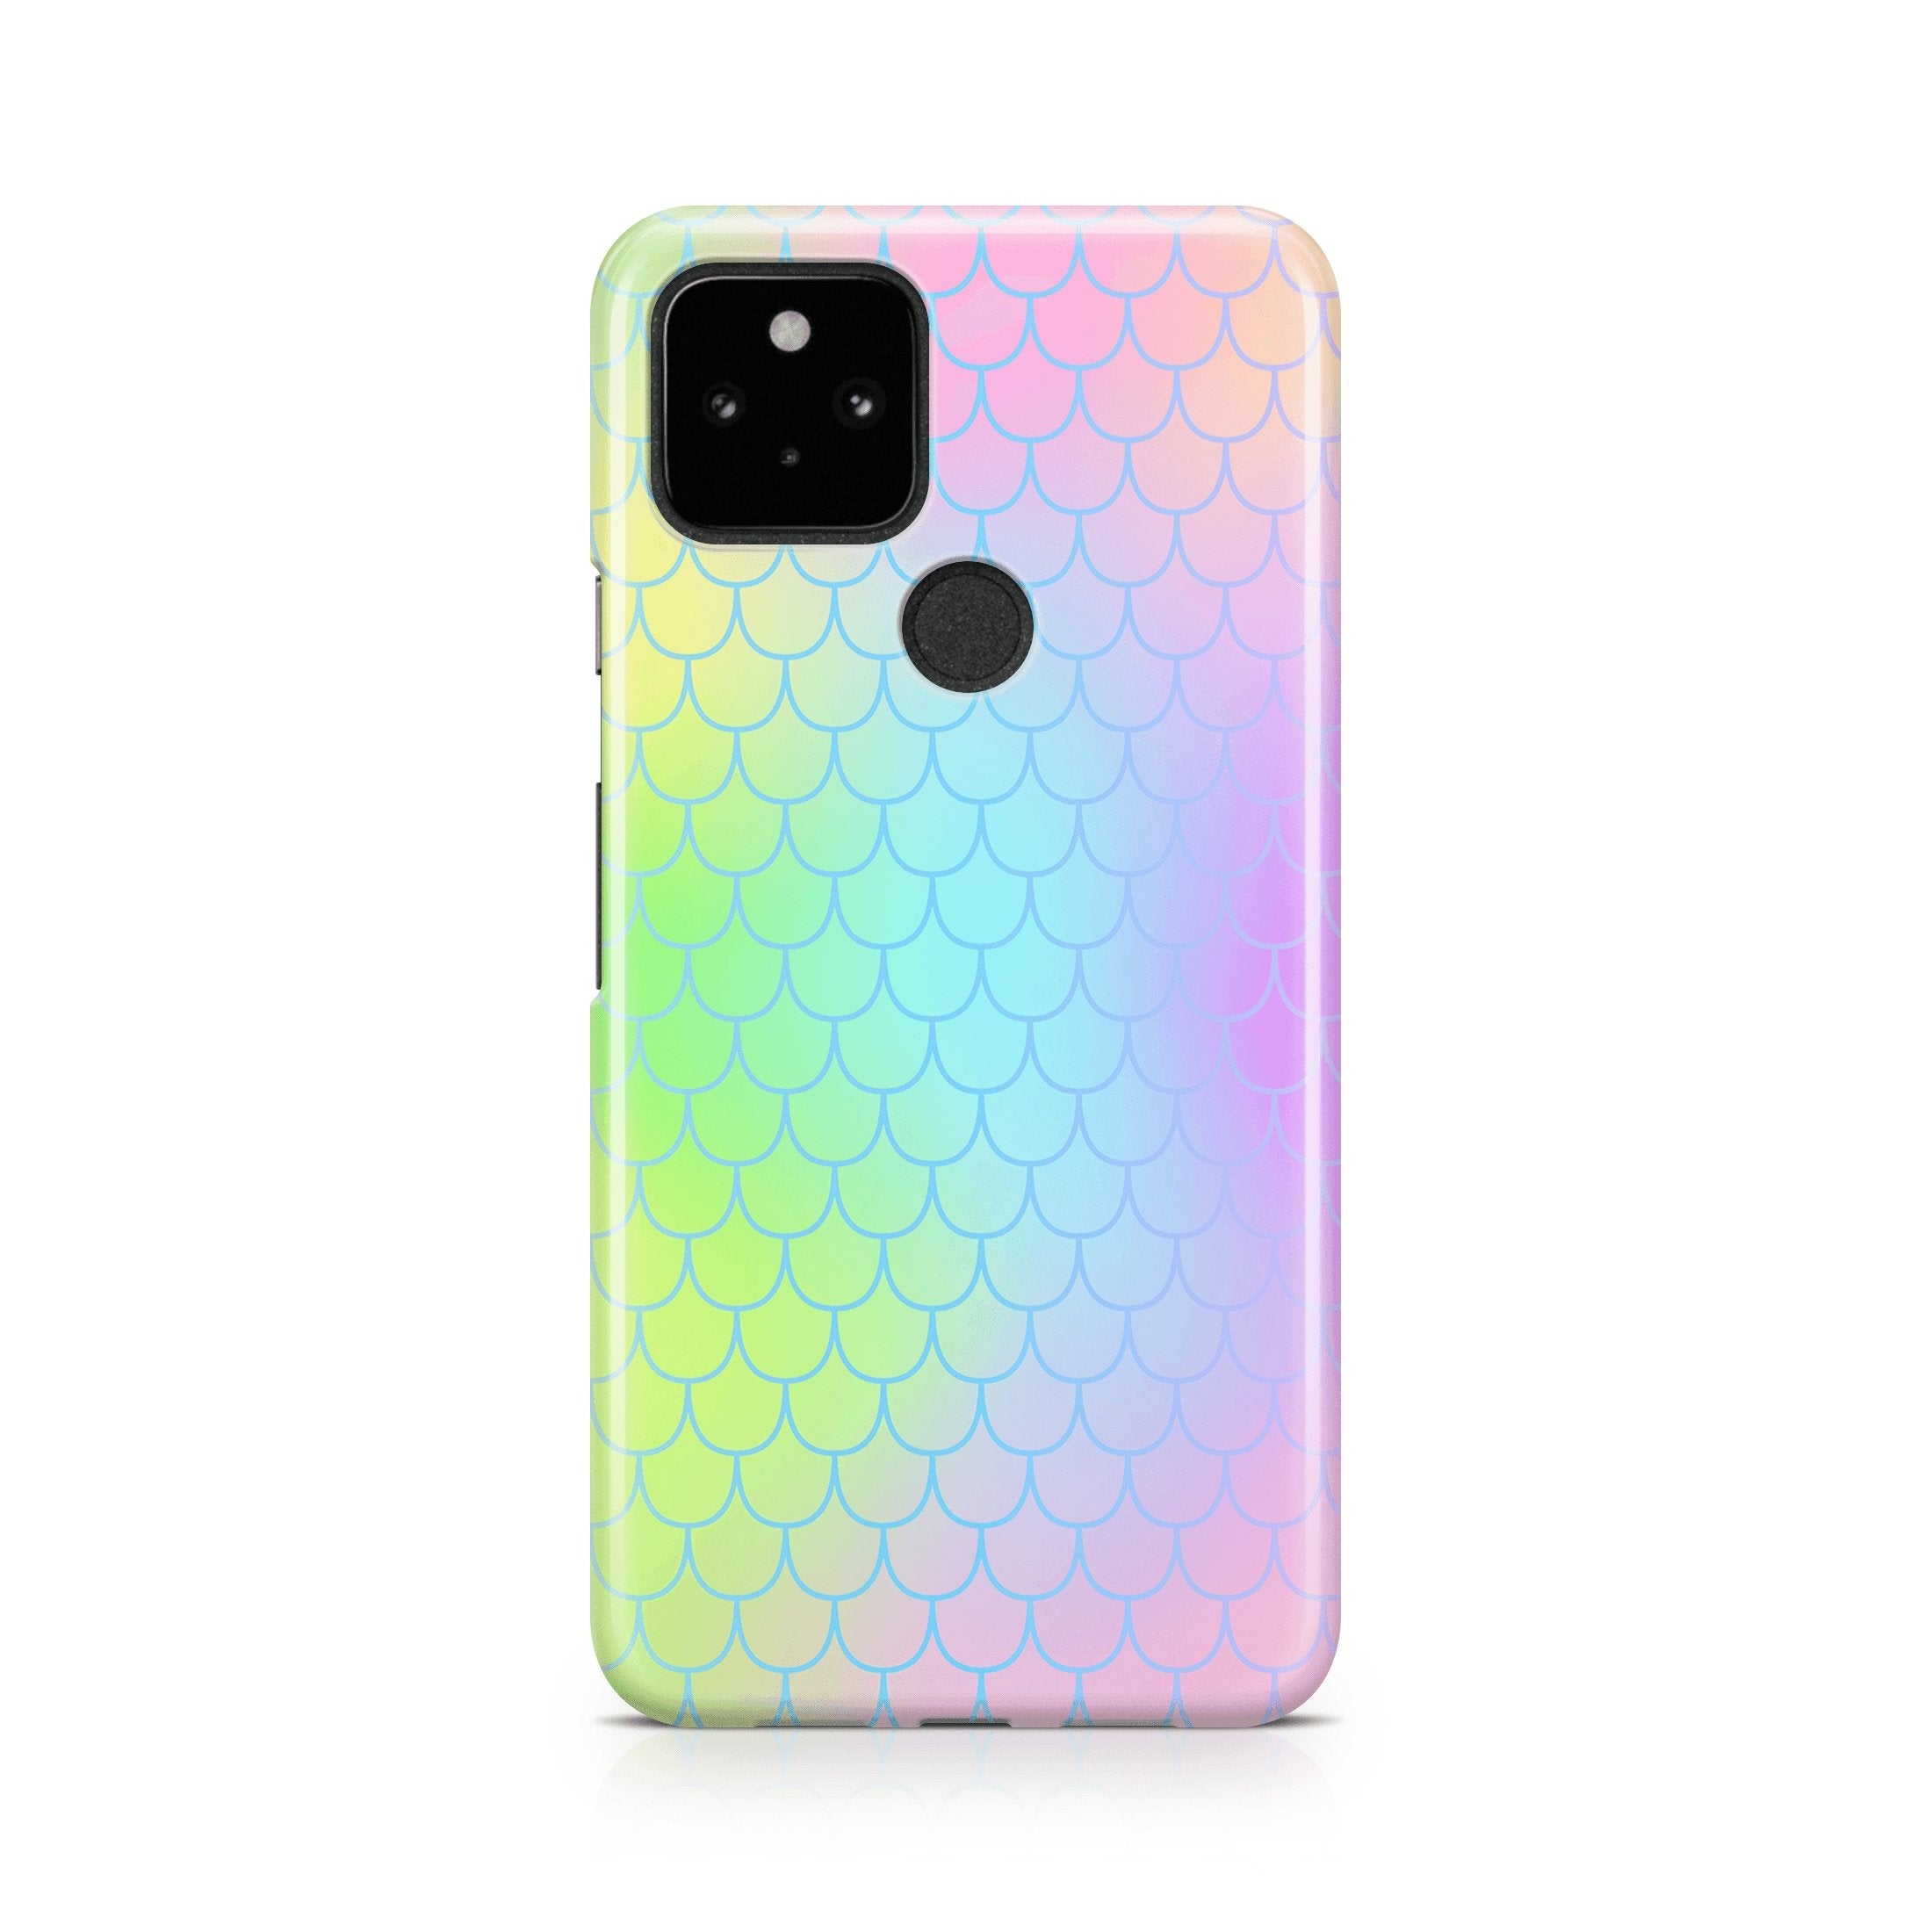 Unicorn Mermaid Scale - Google phone case designs by CaseSwagger